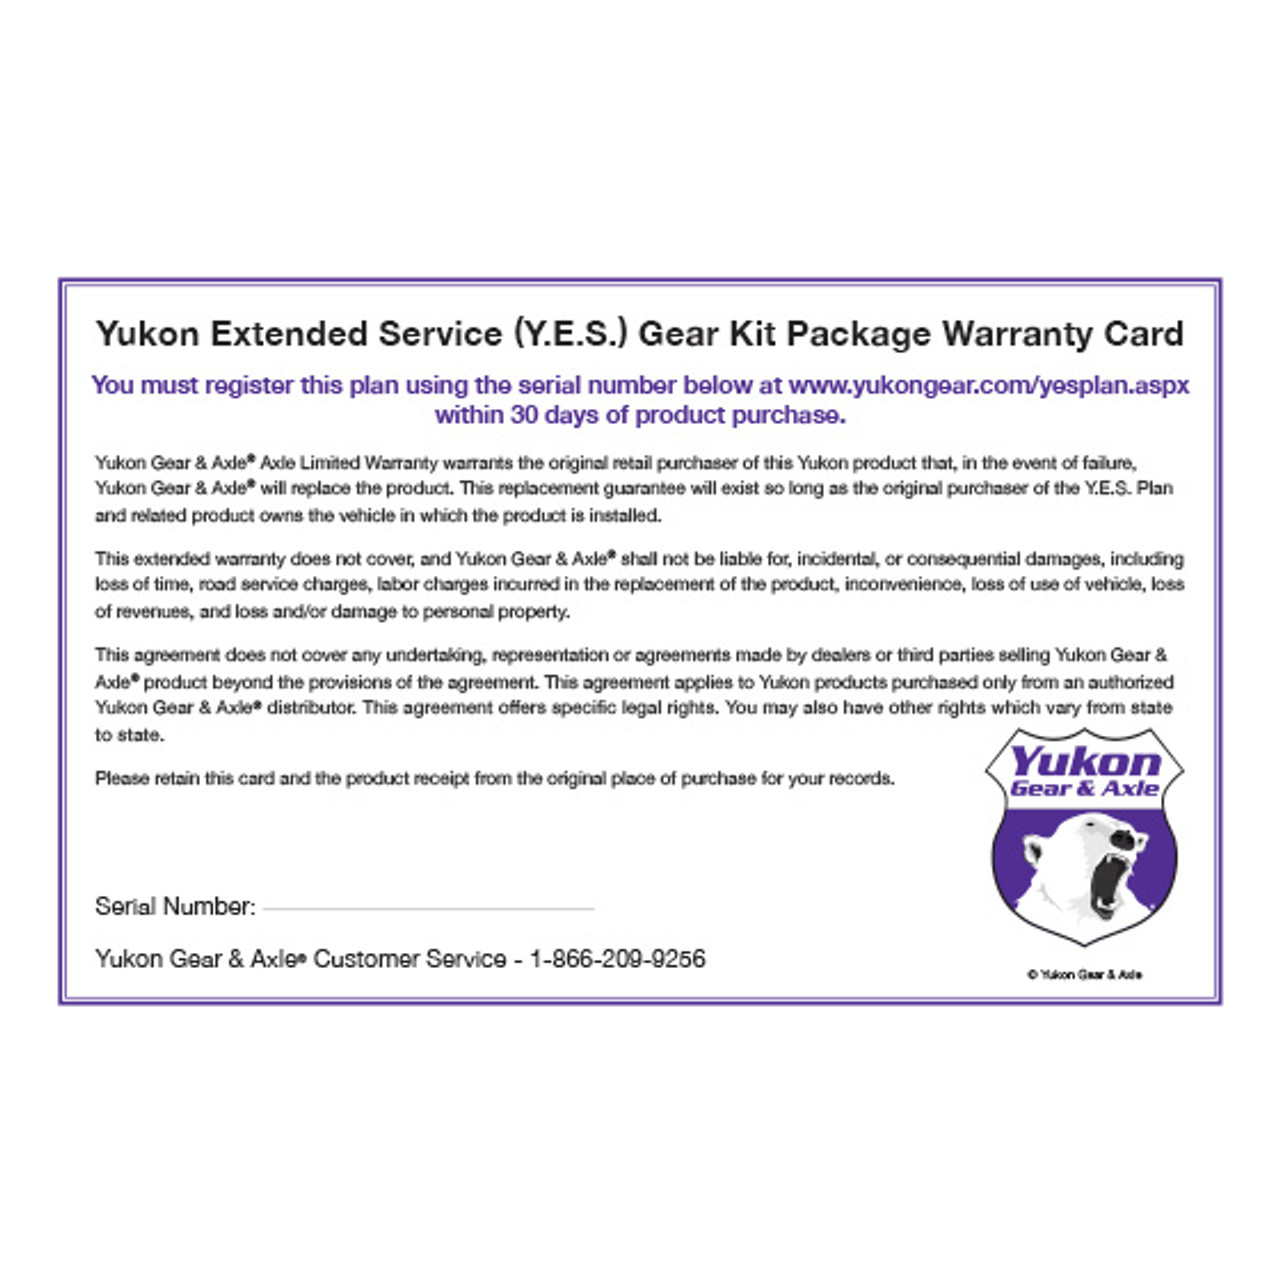 Yukon Extended Service plan for Gear Kit Packages